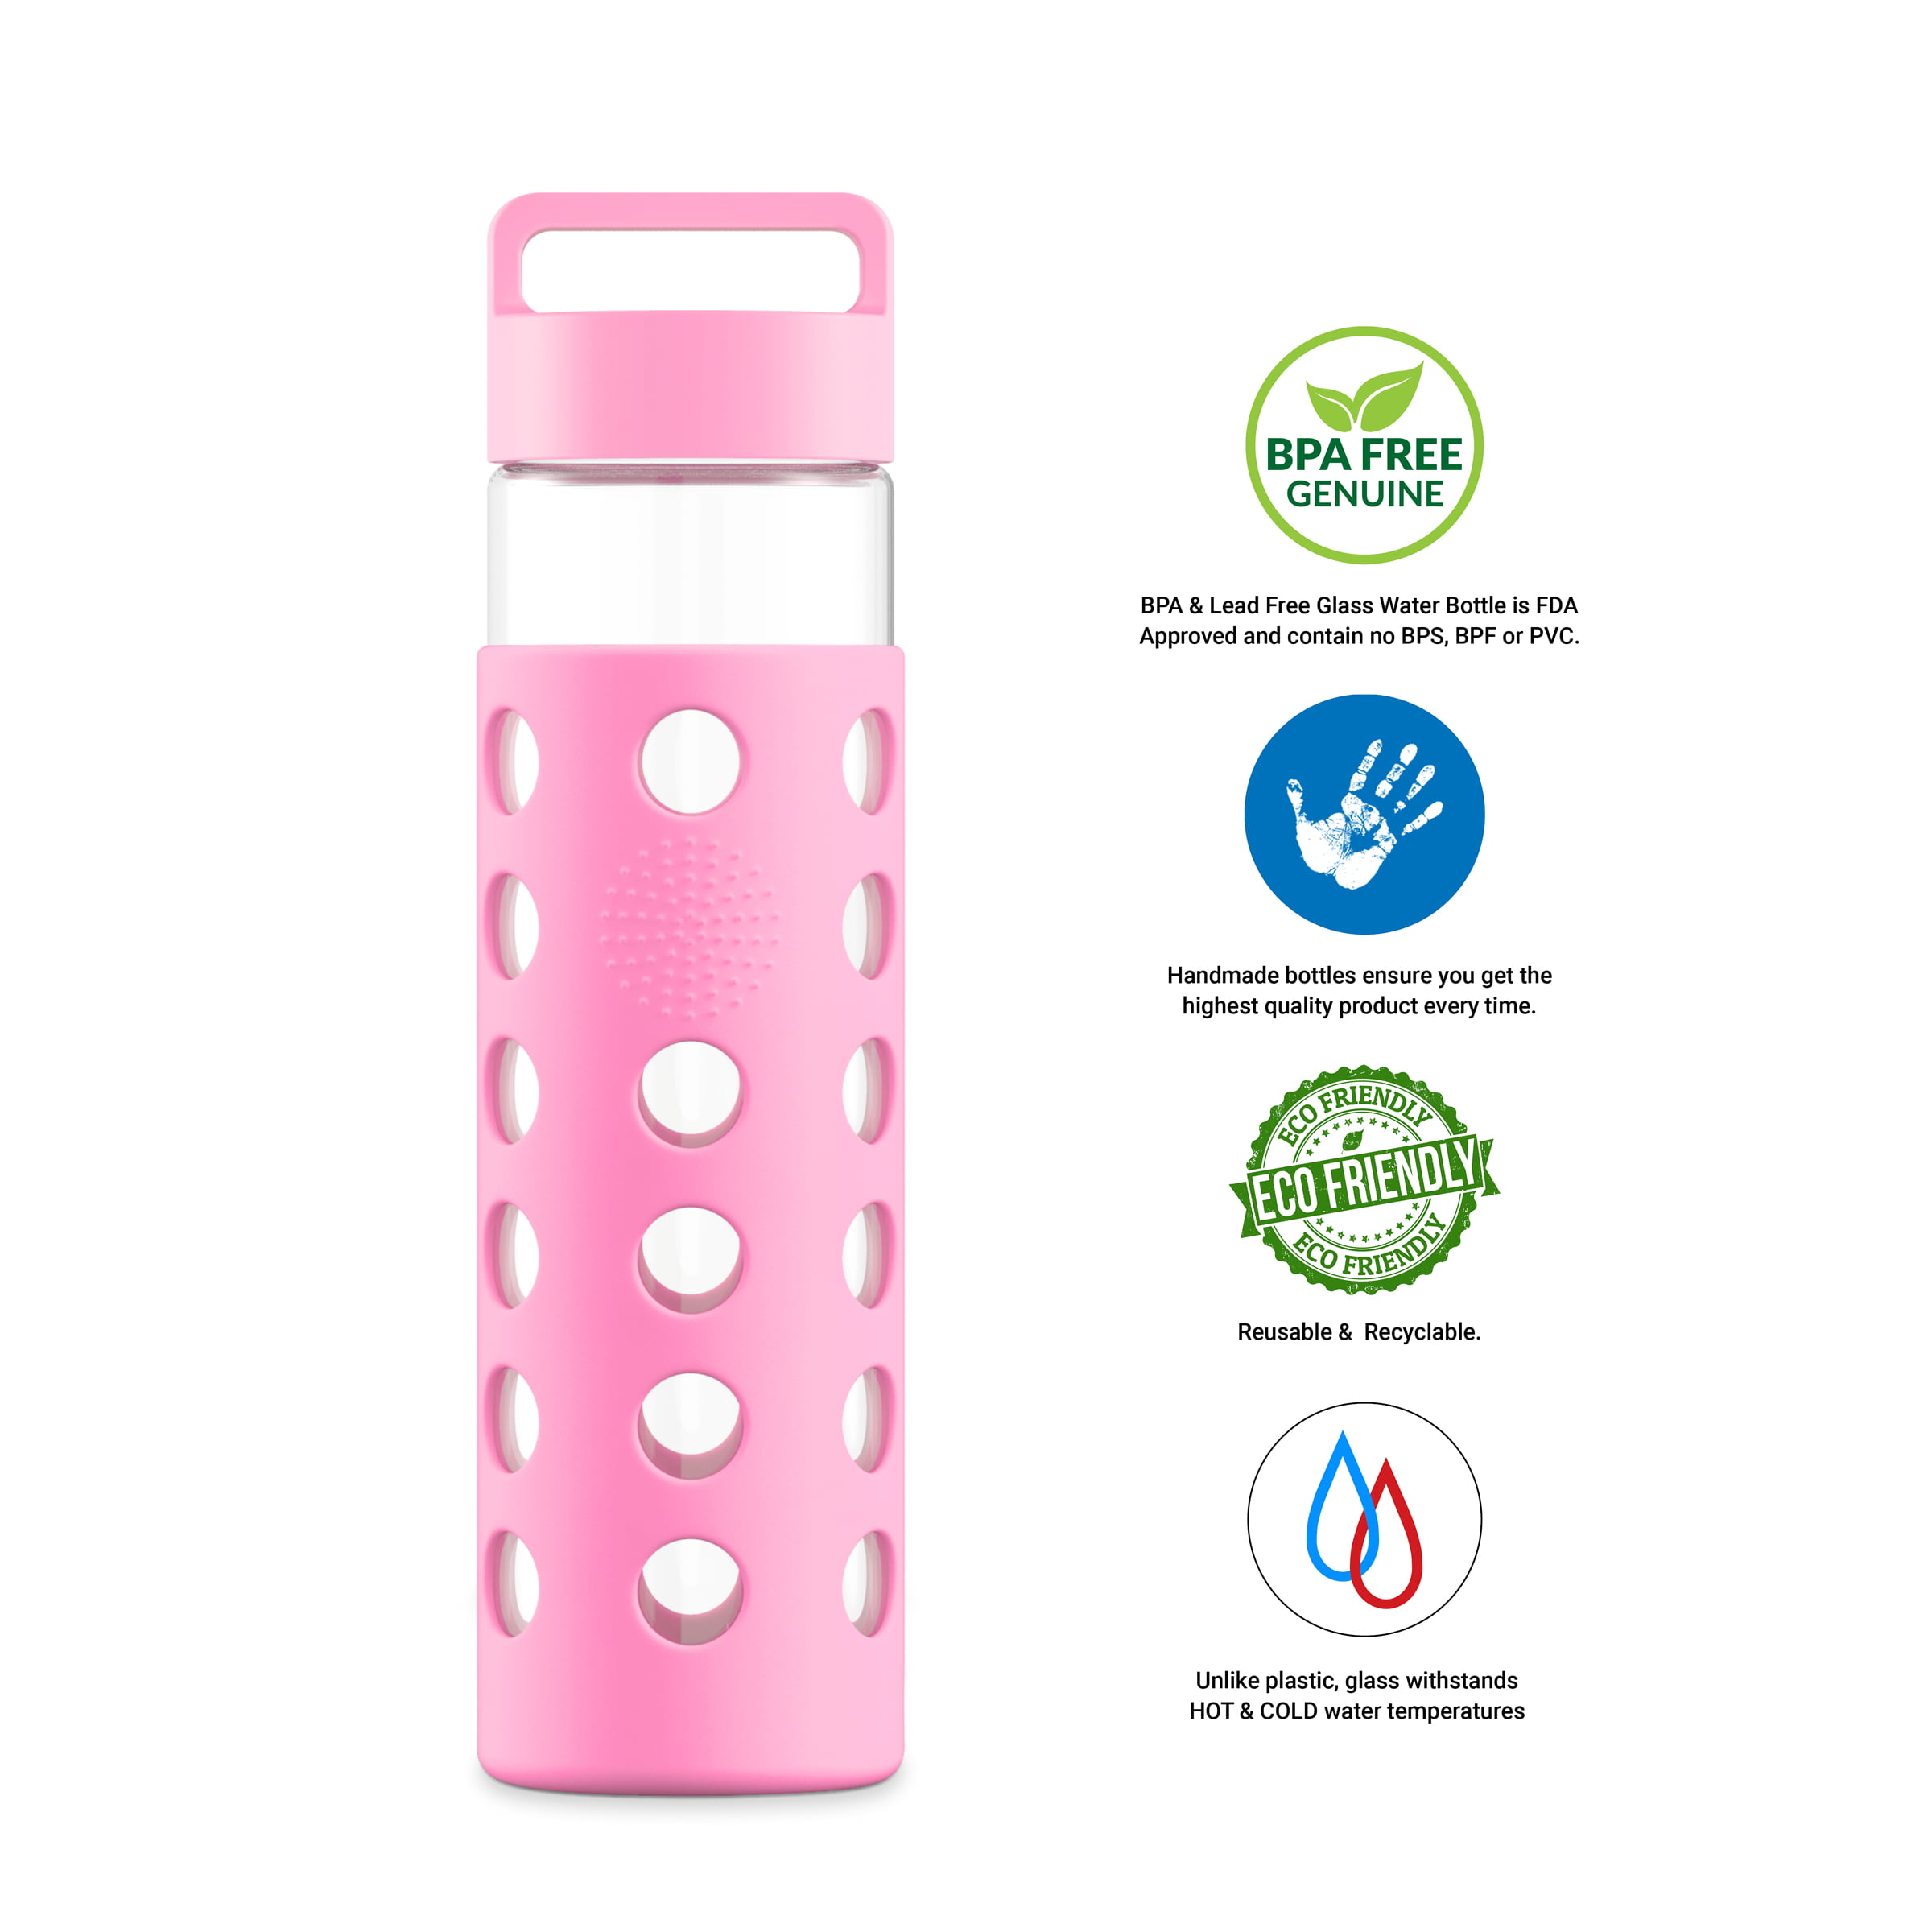 24oz Geo Hot and Cold Glass Drinking Bottle with Protective Silicone Sleeve